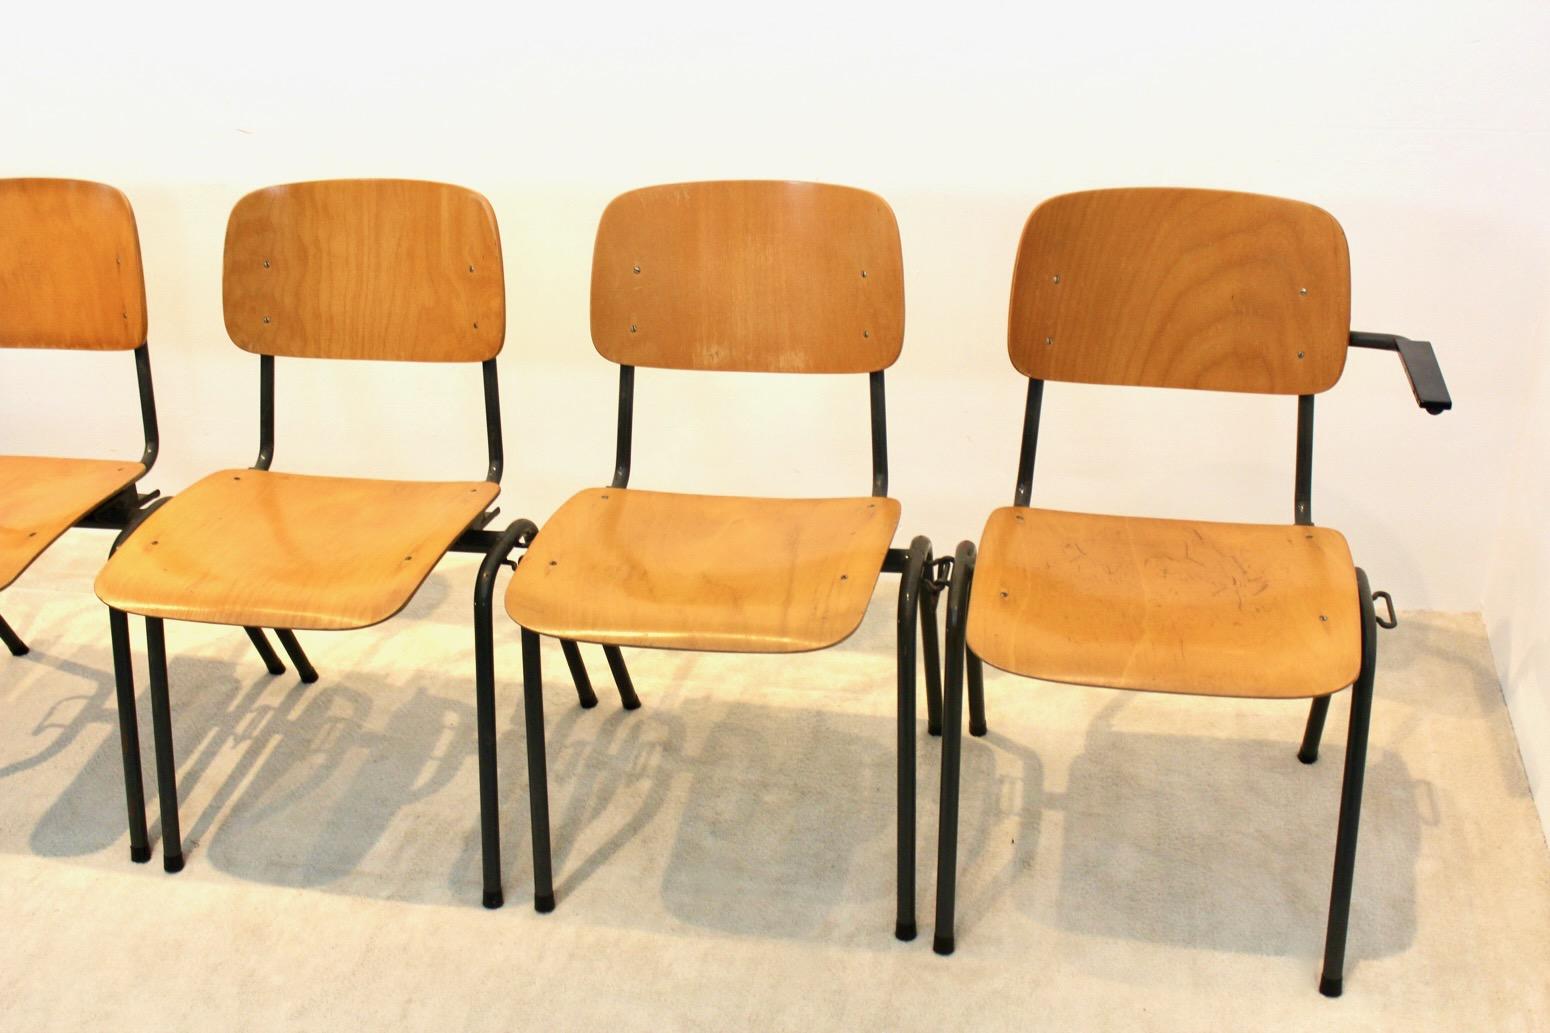 Steel Unique Industrial Plywood Stackable School Sofa Seat by Marko Holland, 1960s For Sale